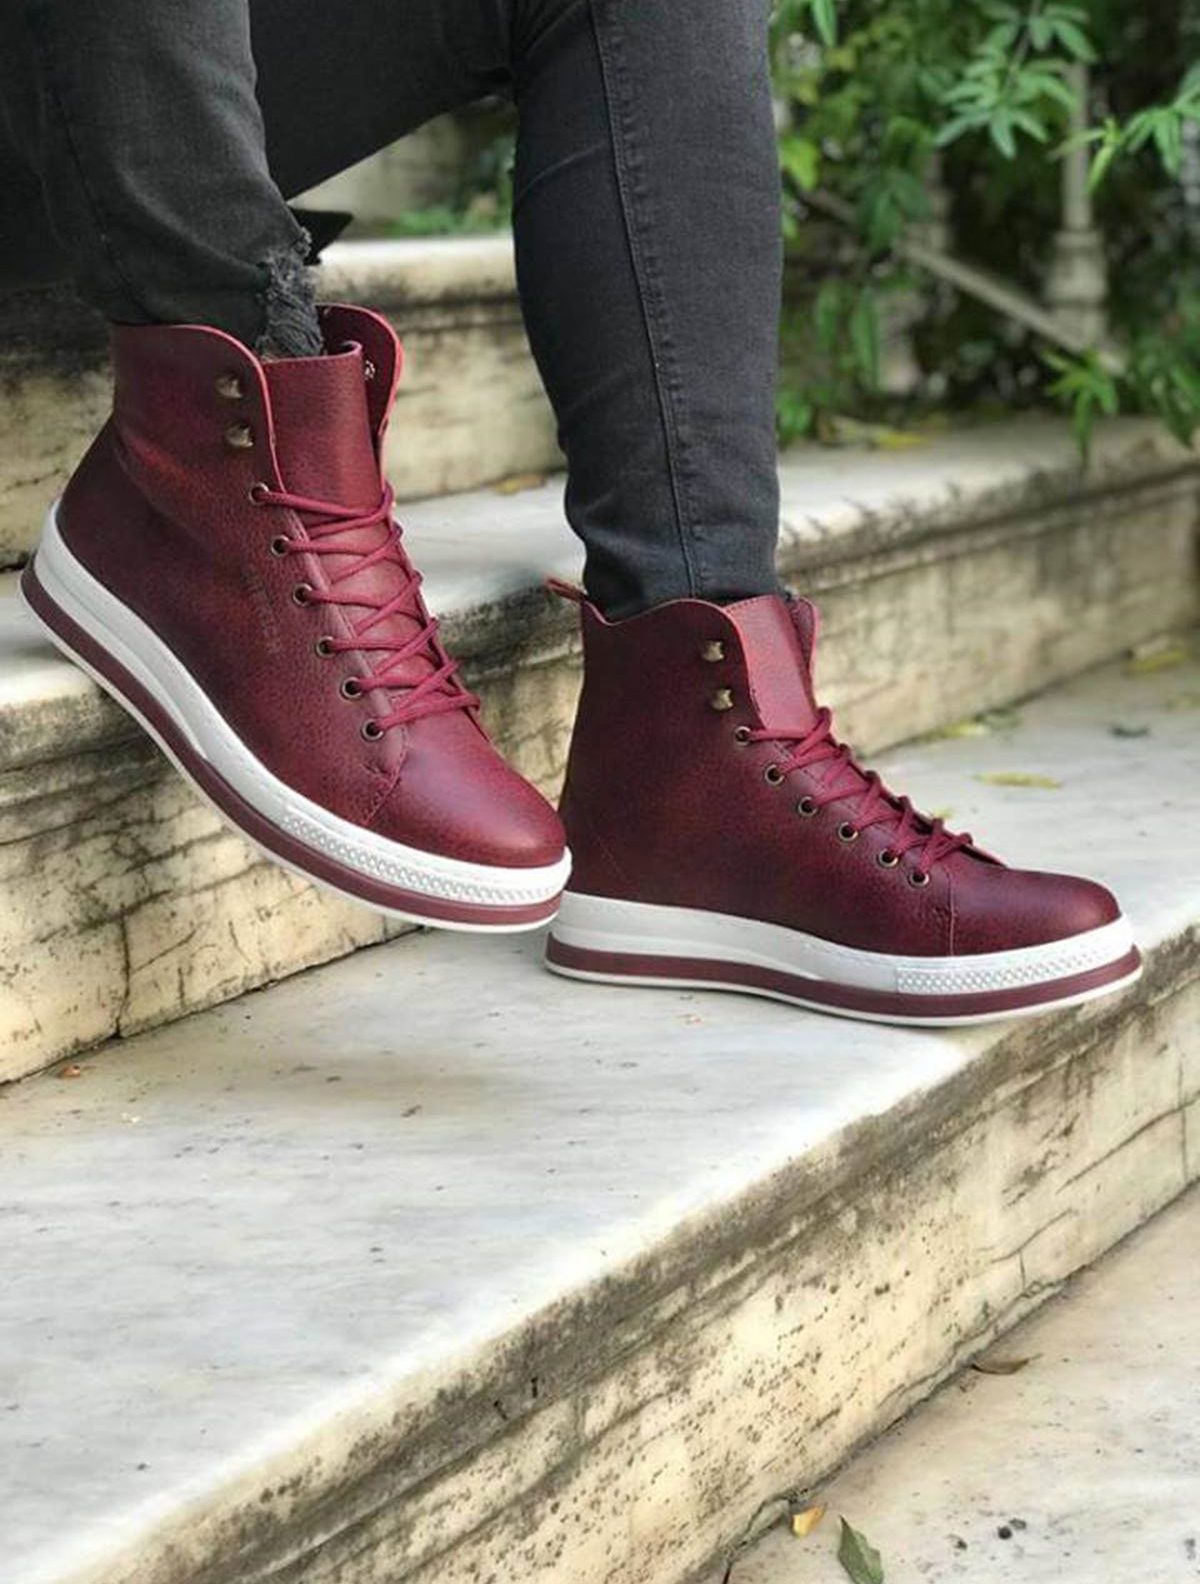 Chekich Boots for Men Claret Red Color Artificial Leather Lace Up Winter Season Shoes Ankle Warm Comfortable High Quality Footwear Gentlemen Basic Odorless Fashion Male Big Sizes Classic Outdoor New-Arrival CH055 V4